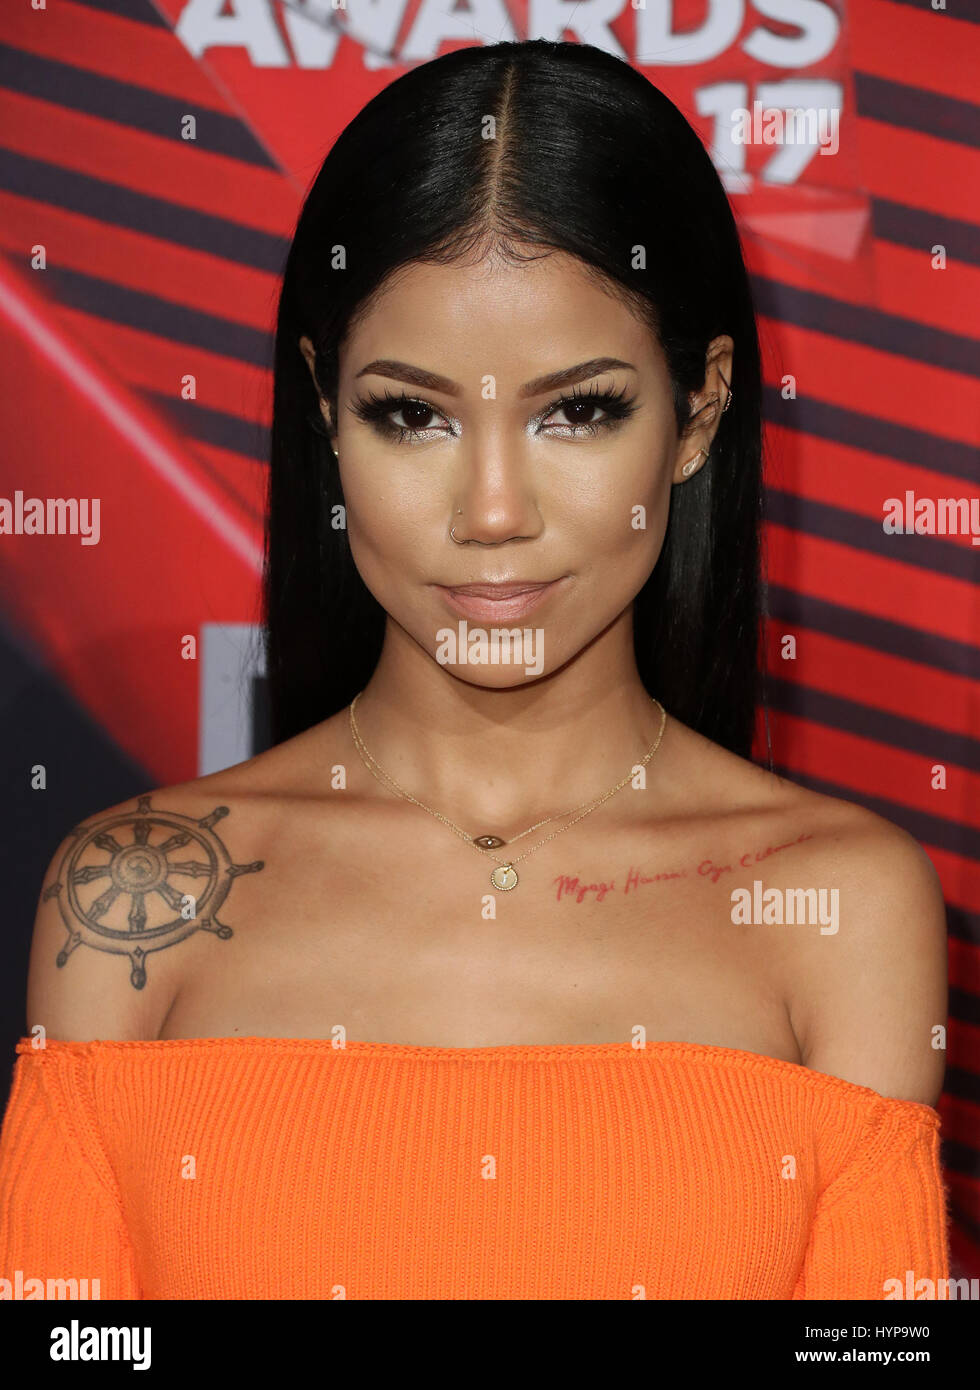 2017 iHeartRadio Music Awards Featuring Jhene Aiko Where Los Angeles